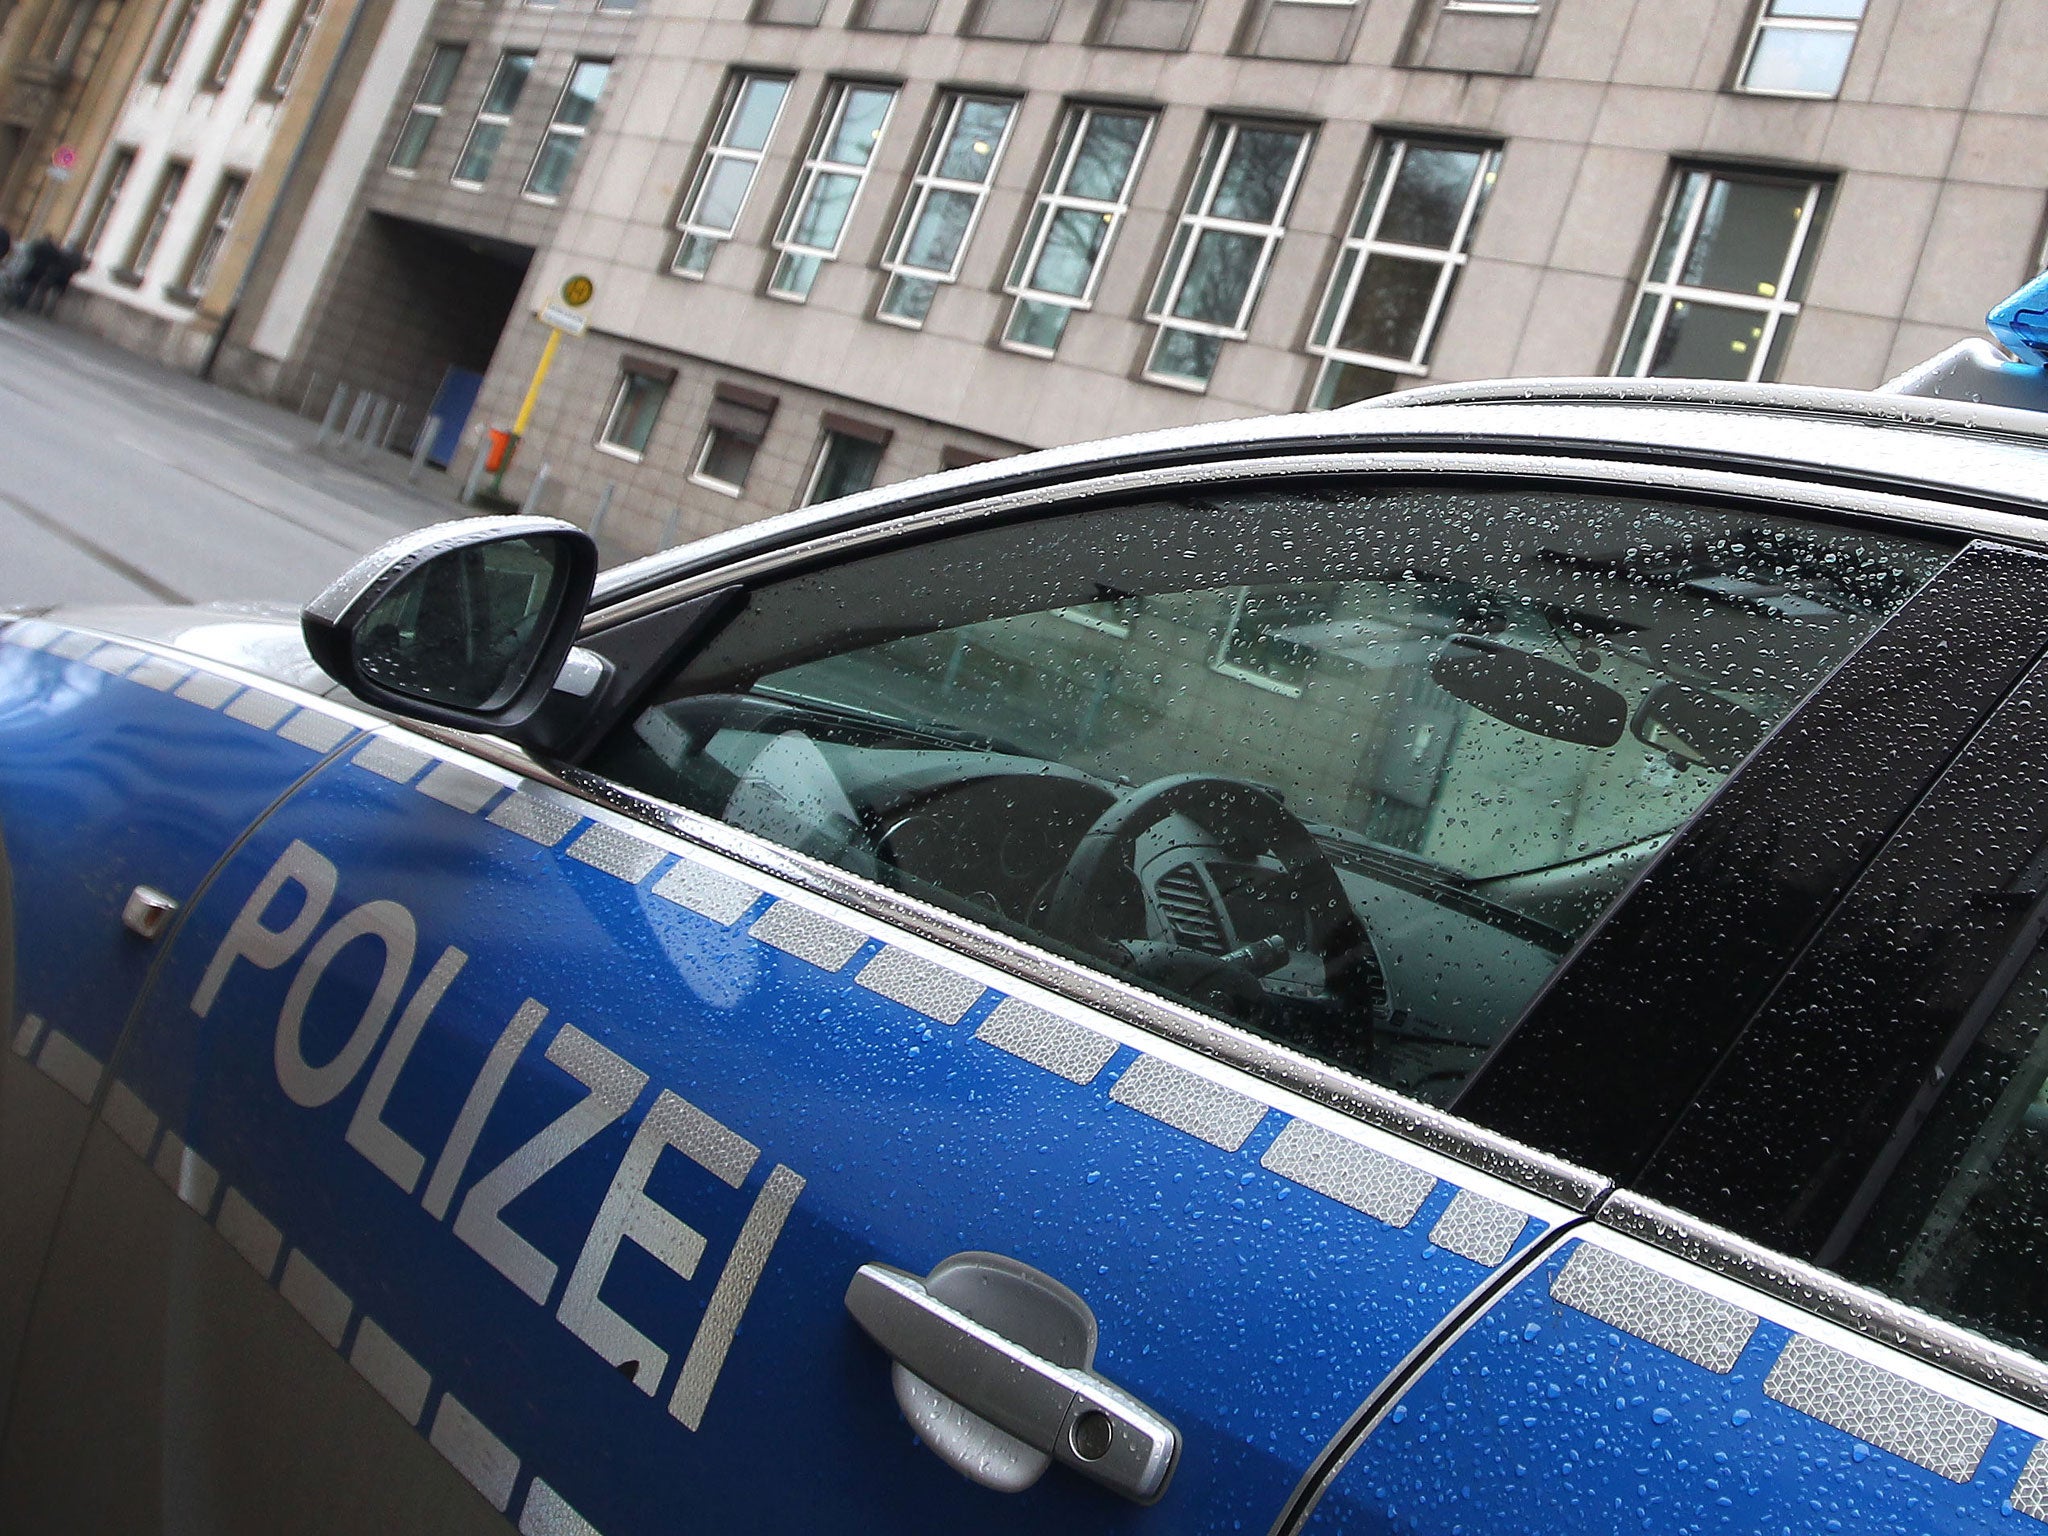 A German police car stands, unrelated to the incident in Bavaria where a headmistress in now under investigation for shouting a Nazi salute at children.